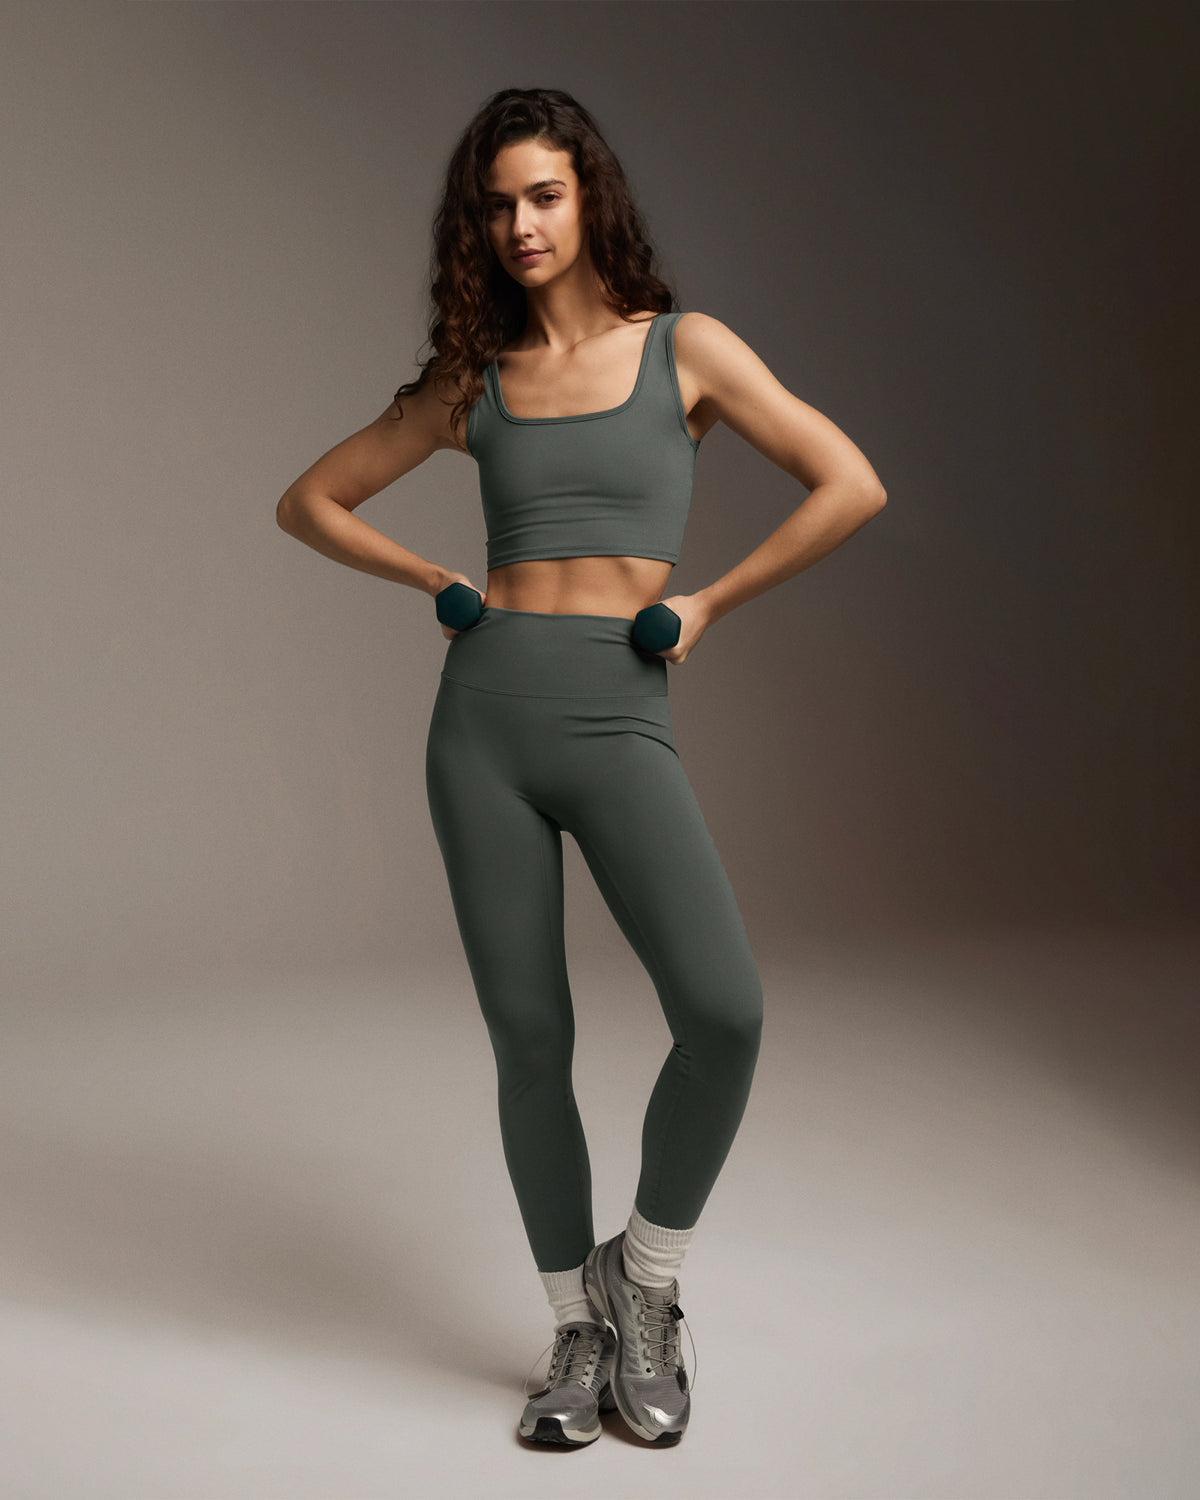  Dream Collection Workout Leggings For Women High